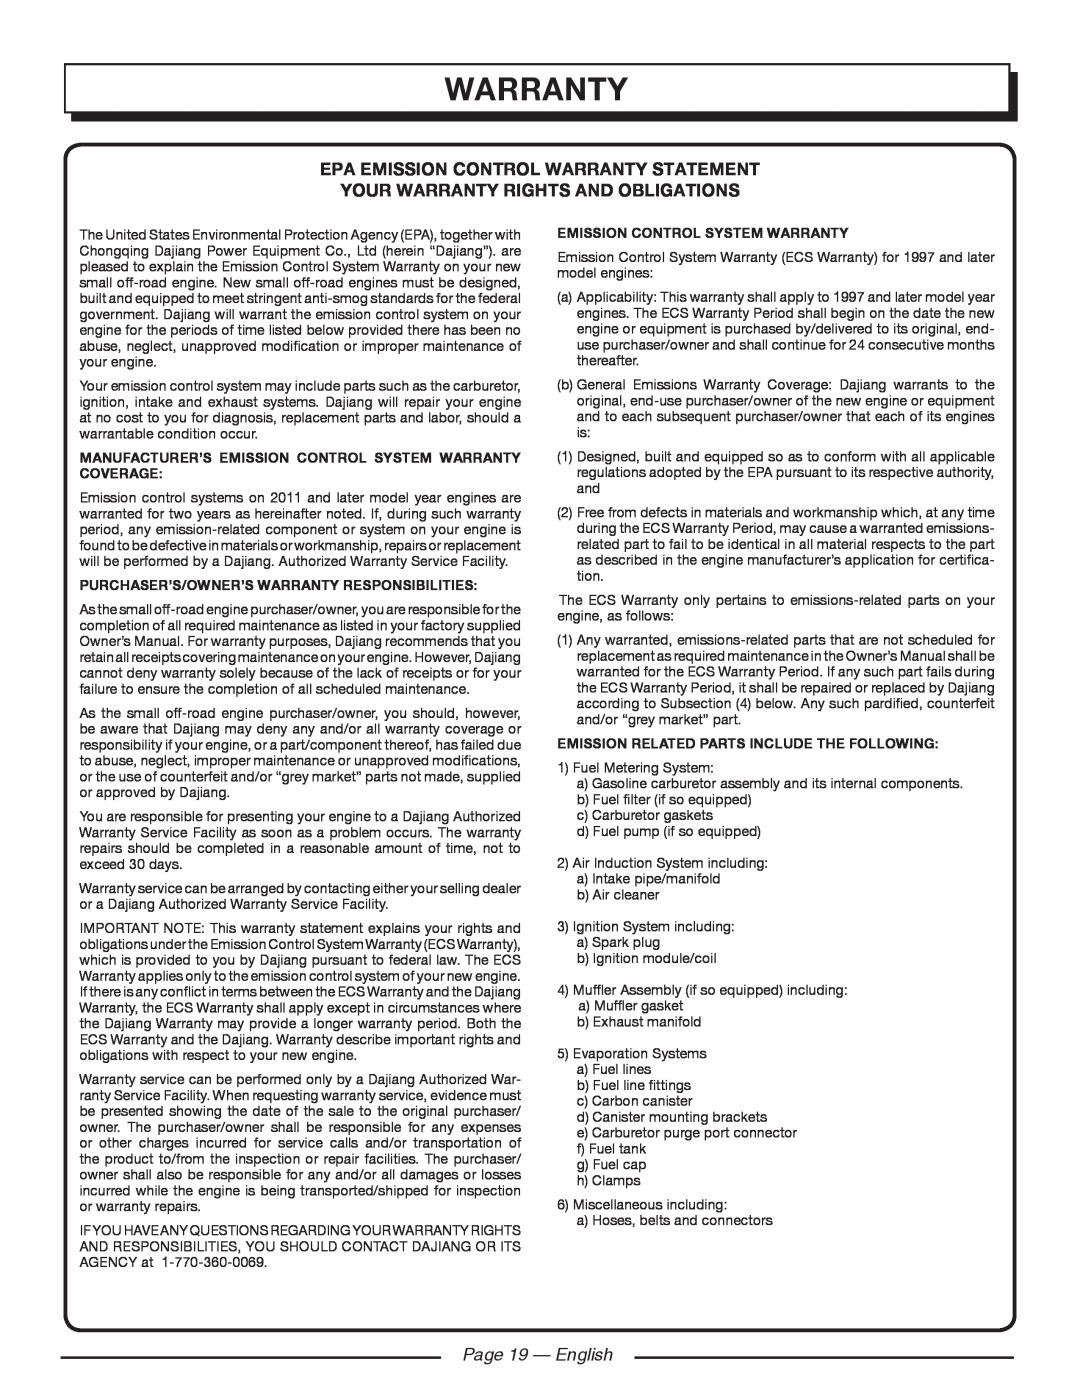 Homelite HGCA5000 Epa Emission Control Warranty Statement, Your Warranty Rights And Obligations, Page 19 - English 